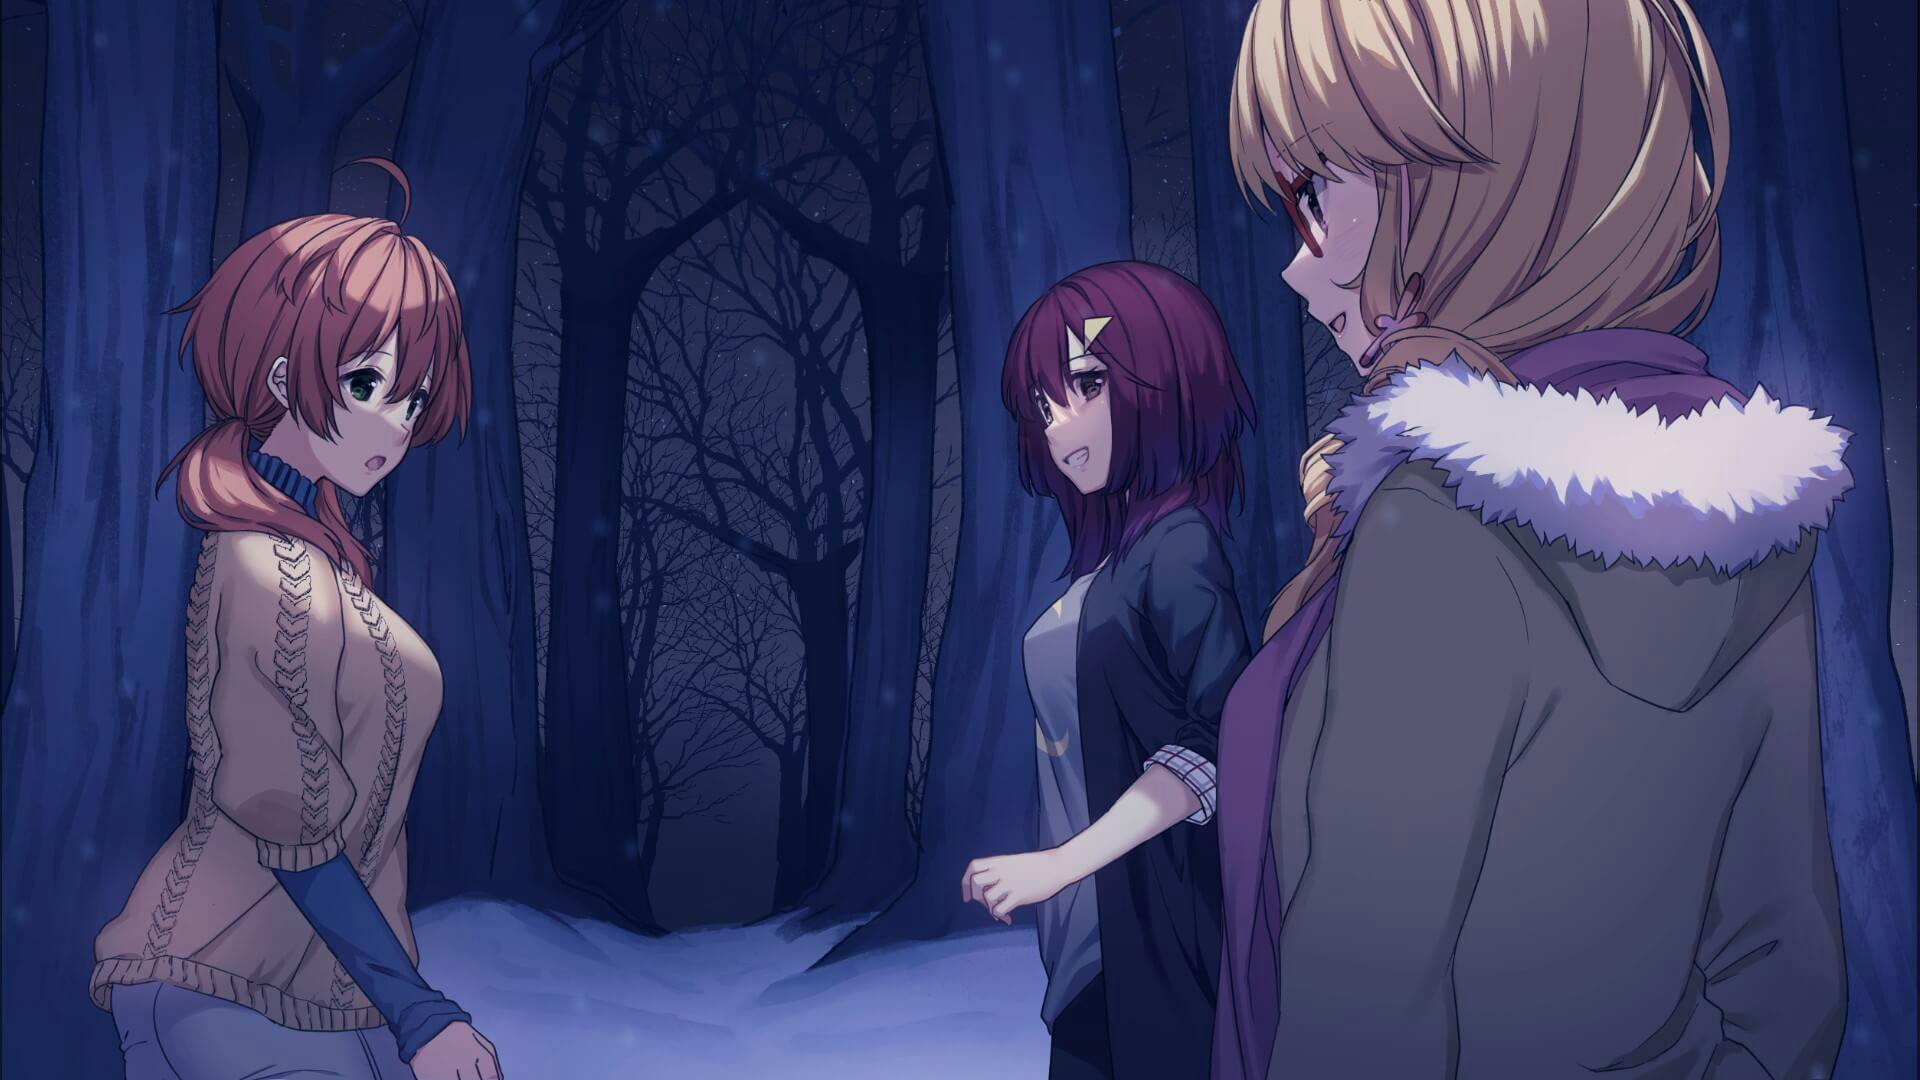 Heart of the Woods Adult Visual Novel